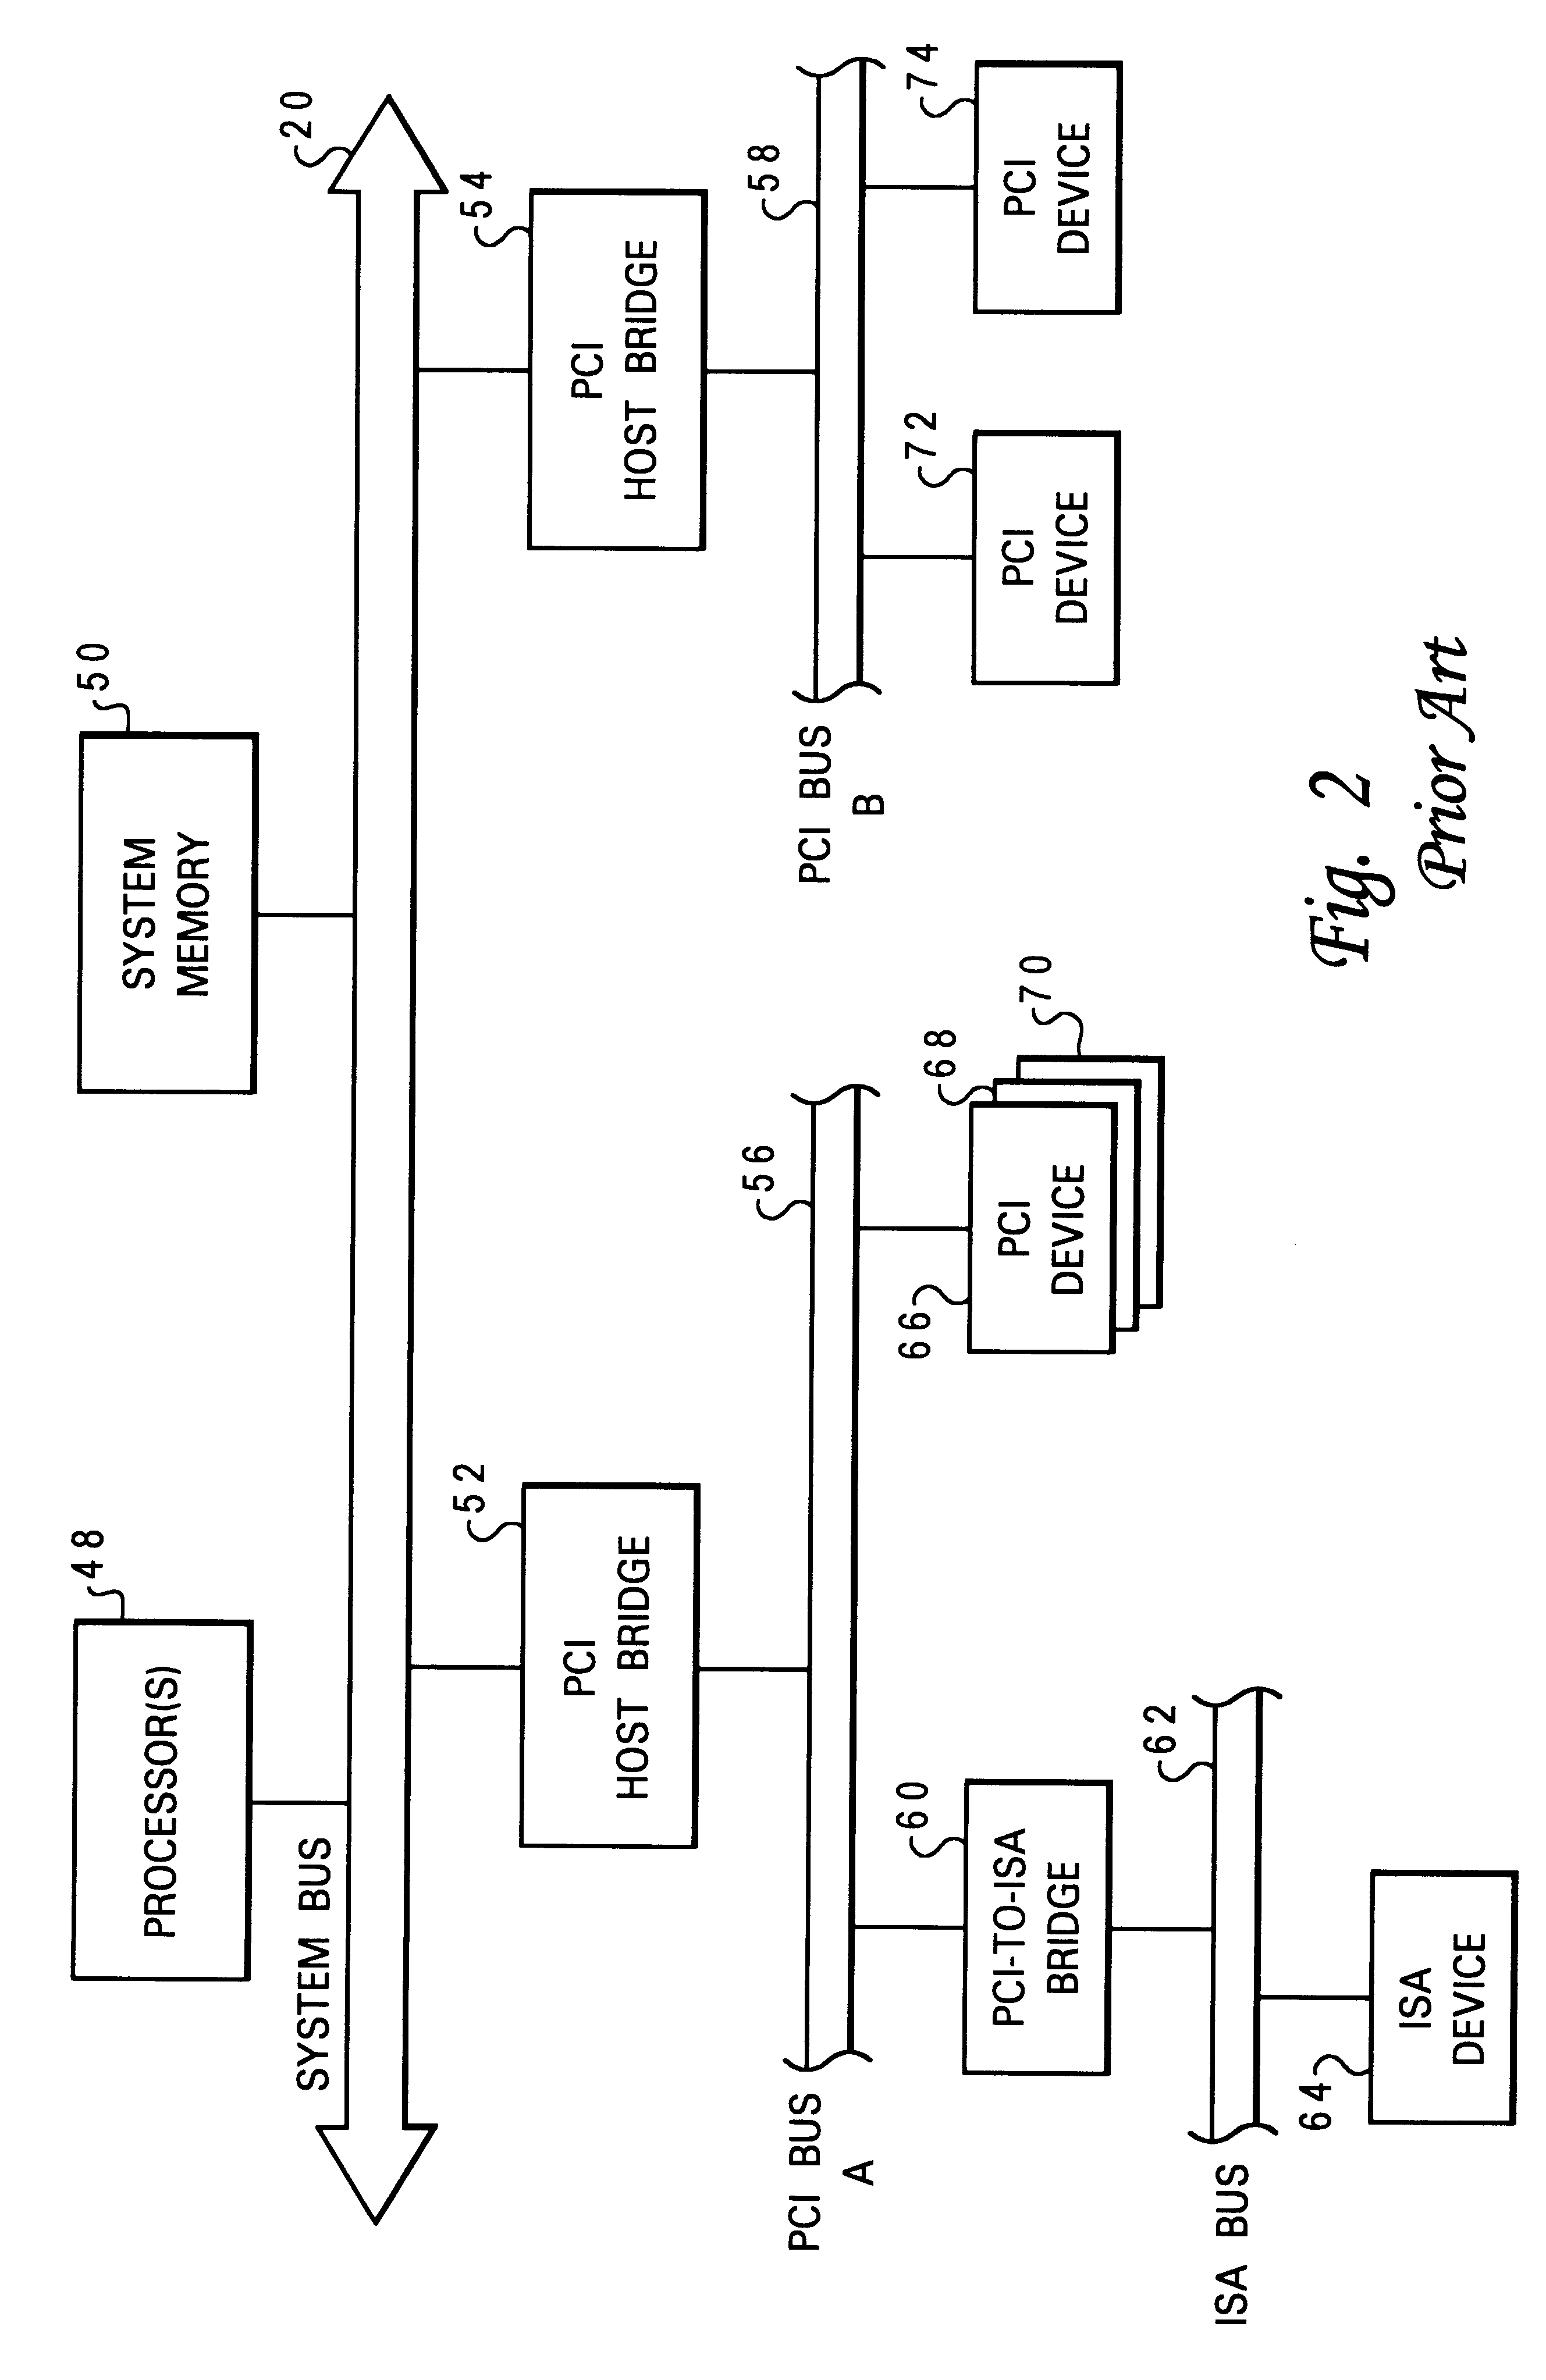 Method and system for supporting peripheral component interconnect (PCI) peer-to-peer access across a PCI host bridge supporting multiple PCI buses